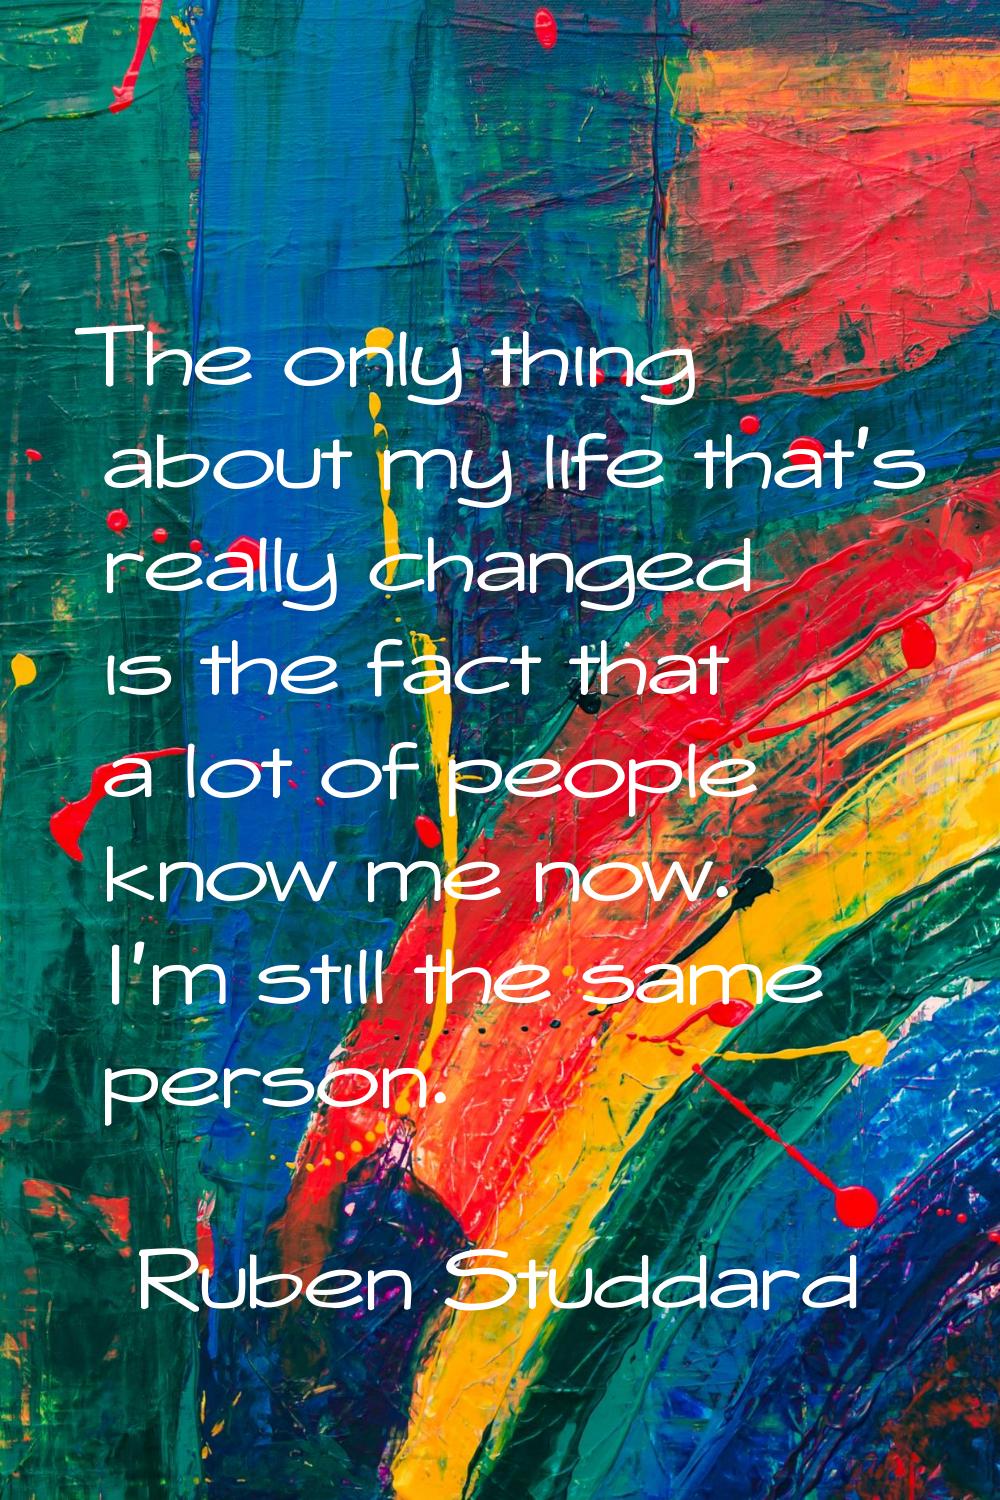 The only thing about my life that's really changed is the fact that a lot of people know me now. I'